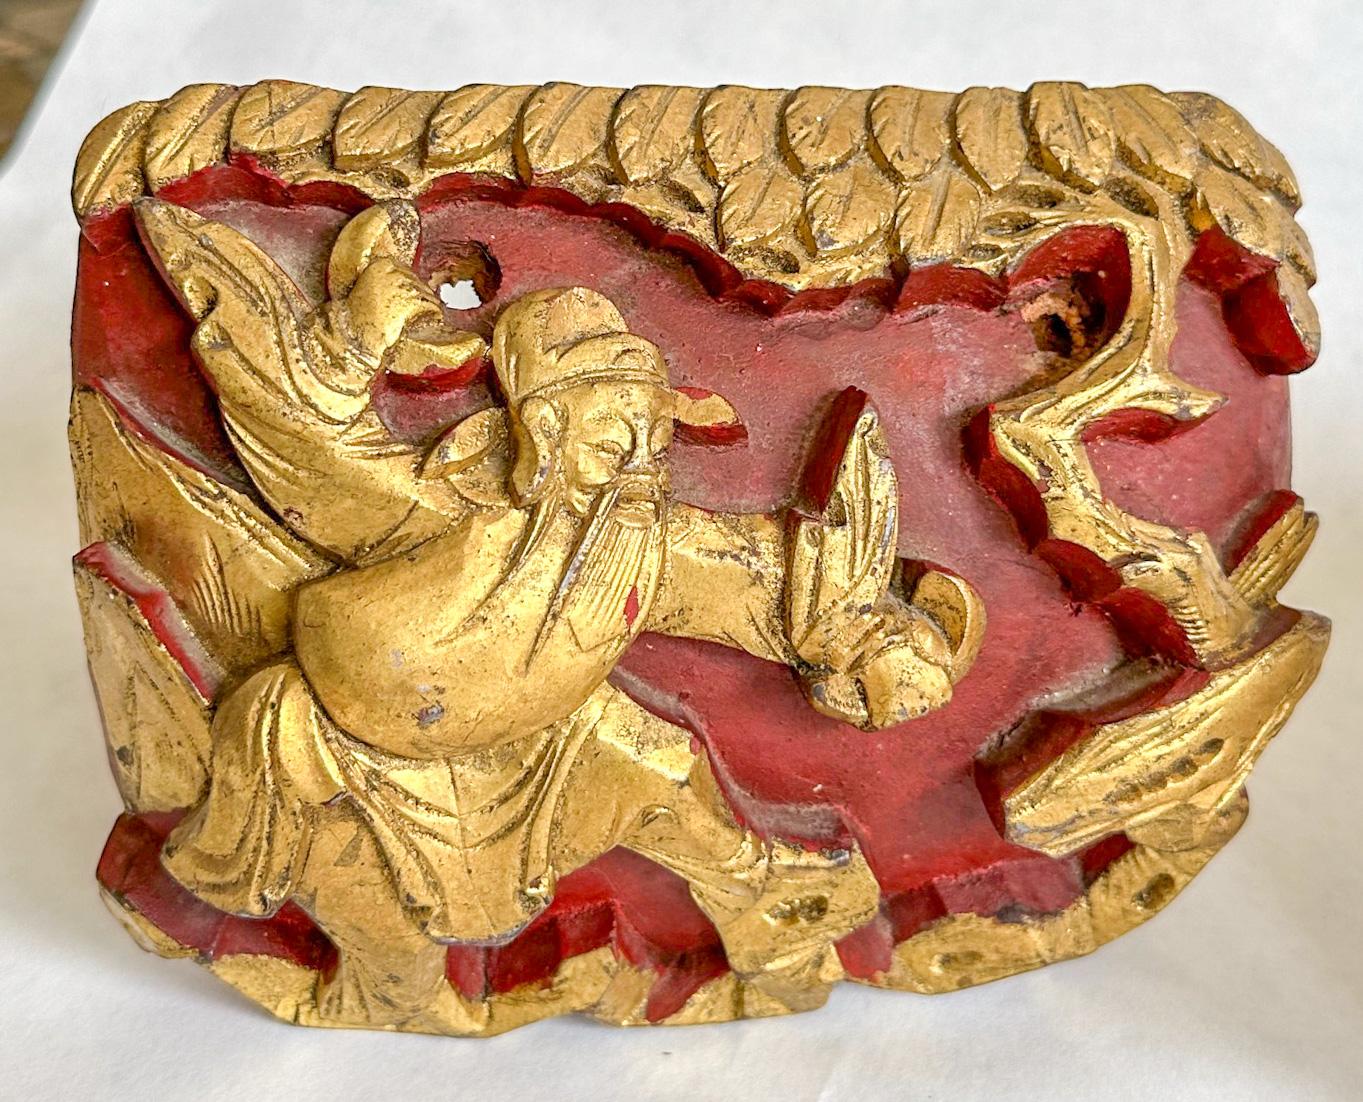 Offered are a pair of oxblood red and gold leaf architectural fragments, most likely Chinese; origin unknown. An unusual find, given the distinct right and left facing nature of the carved ornamentation. Both have foldable easel backs for display.